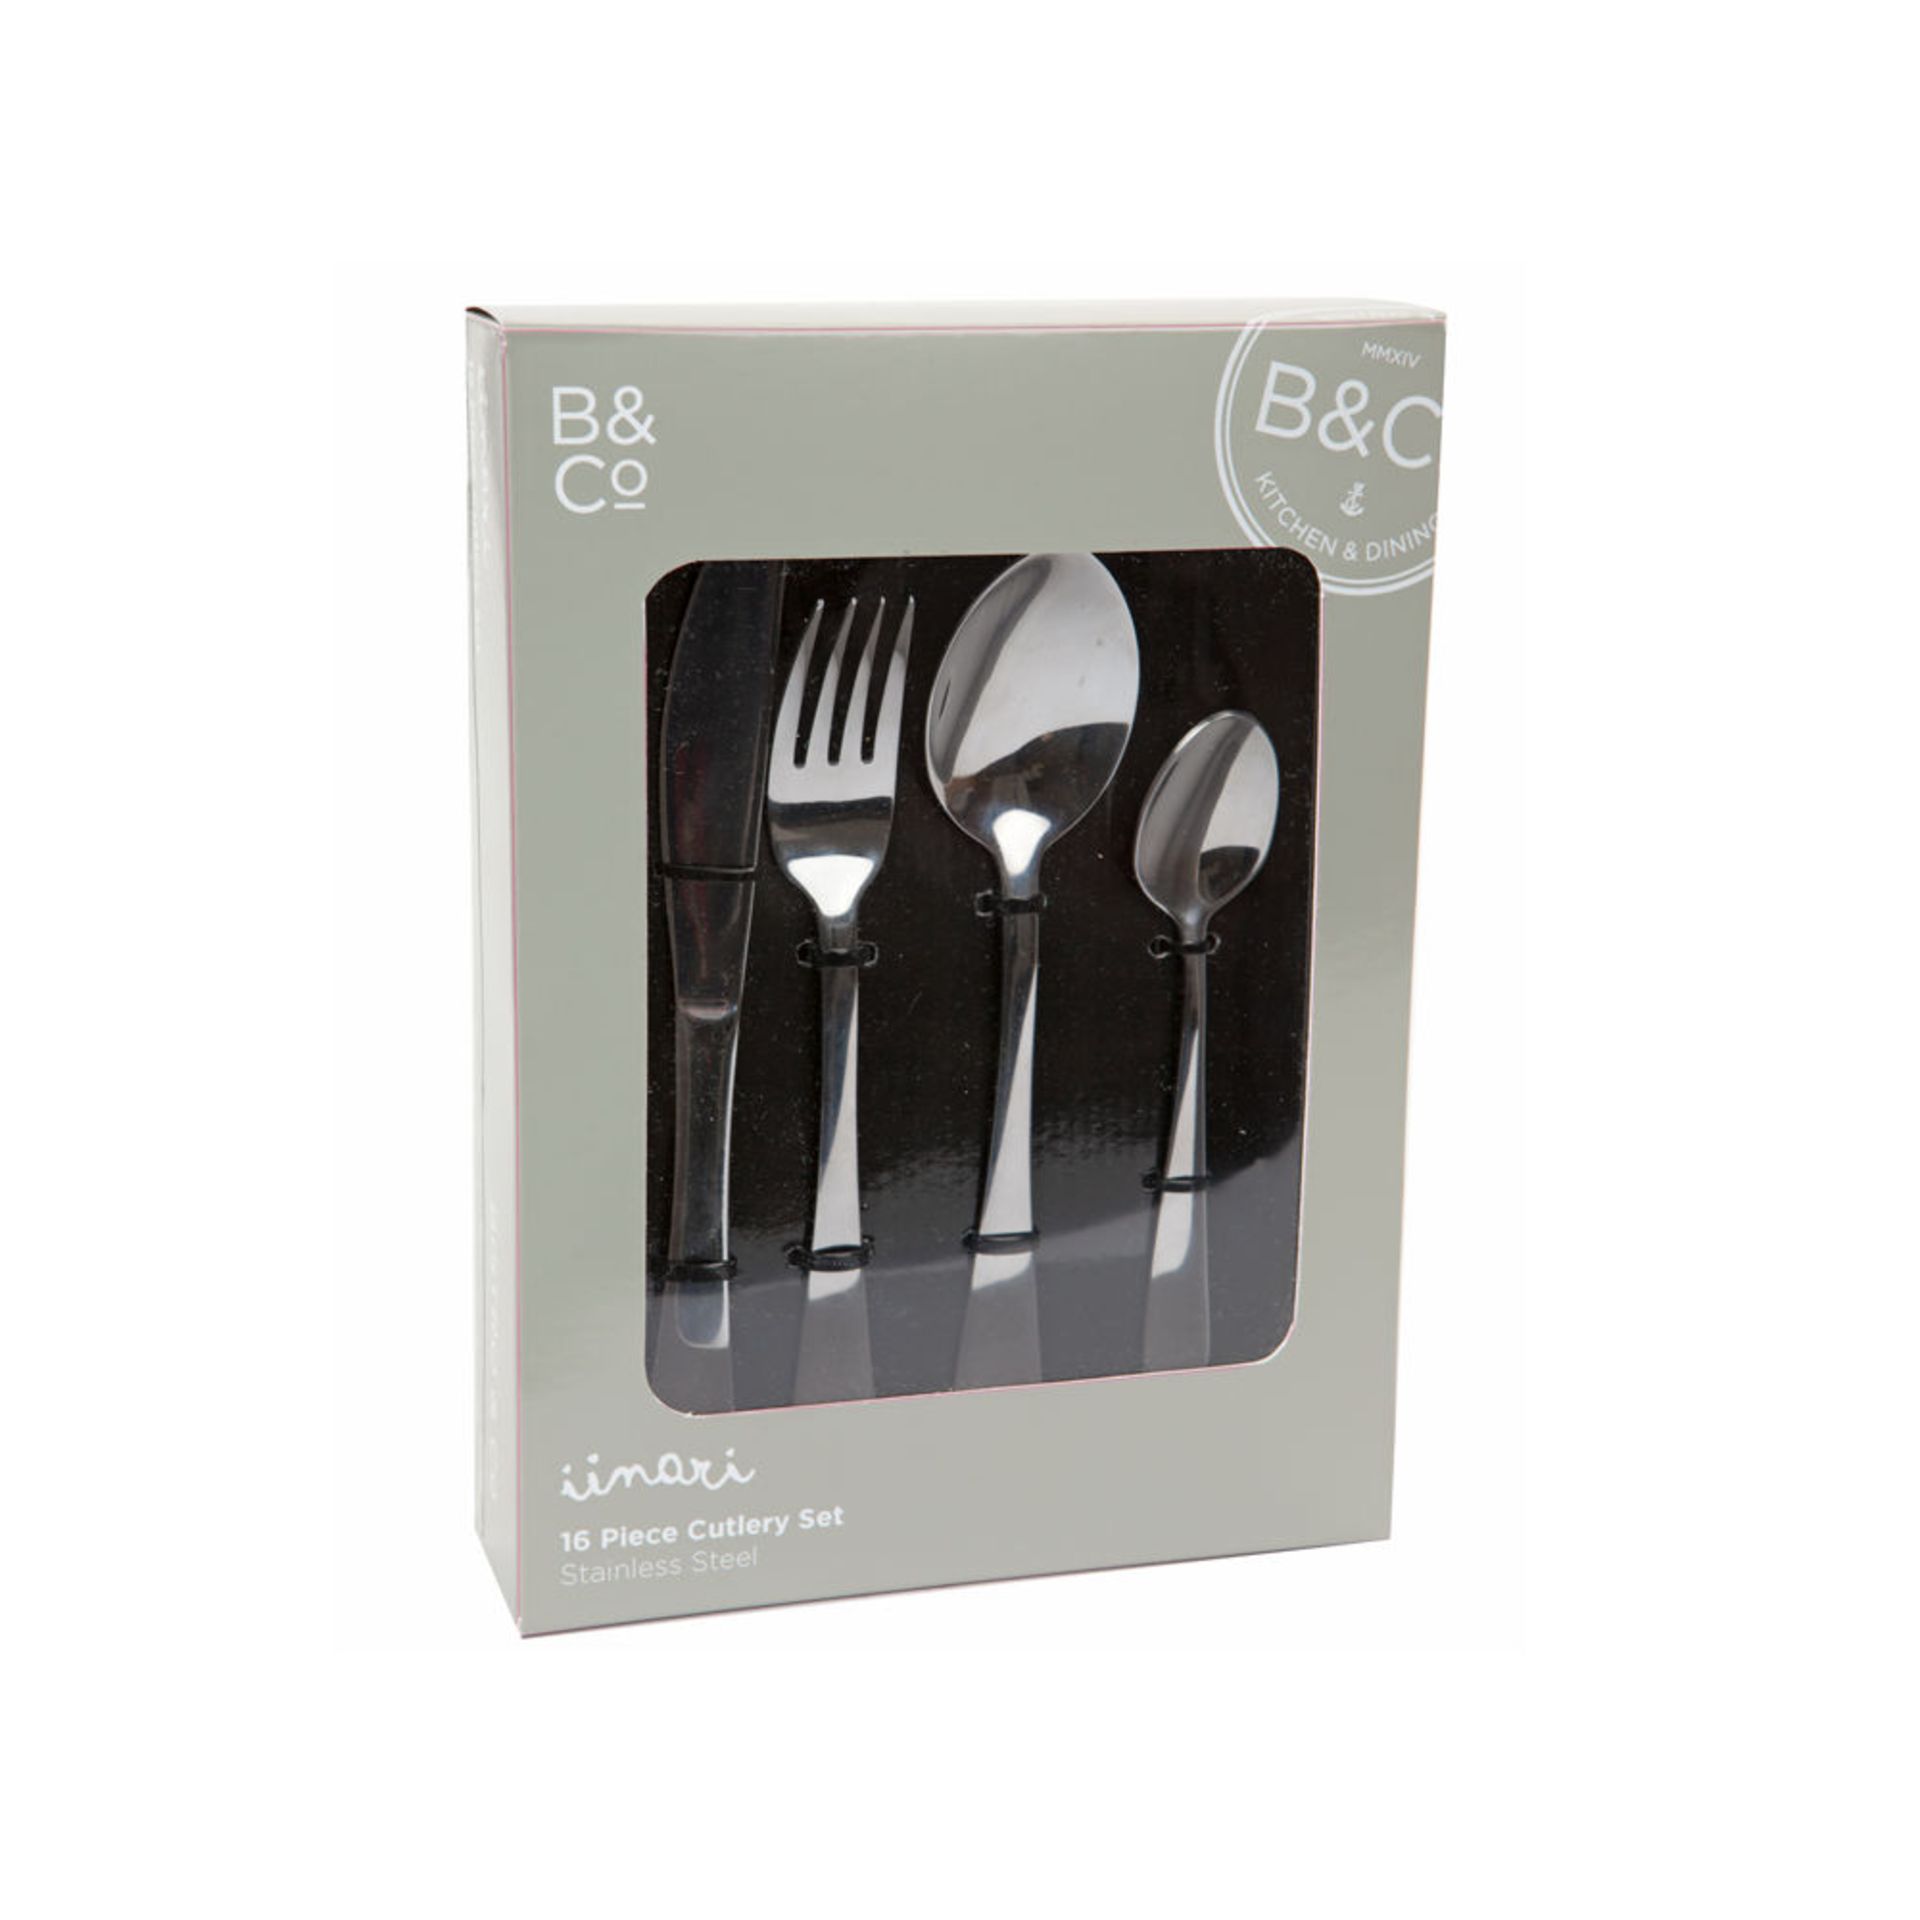 V *TRADE QTY* Brand New Bistro & Co Linari 16 Piece Stainless Steel Cutlery Set X 4 YOUR BID PRICE